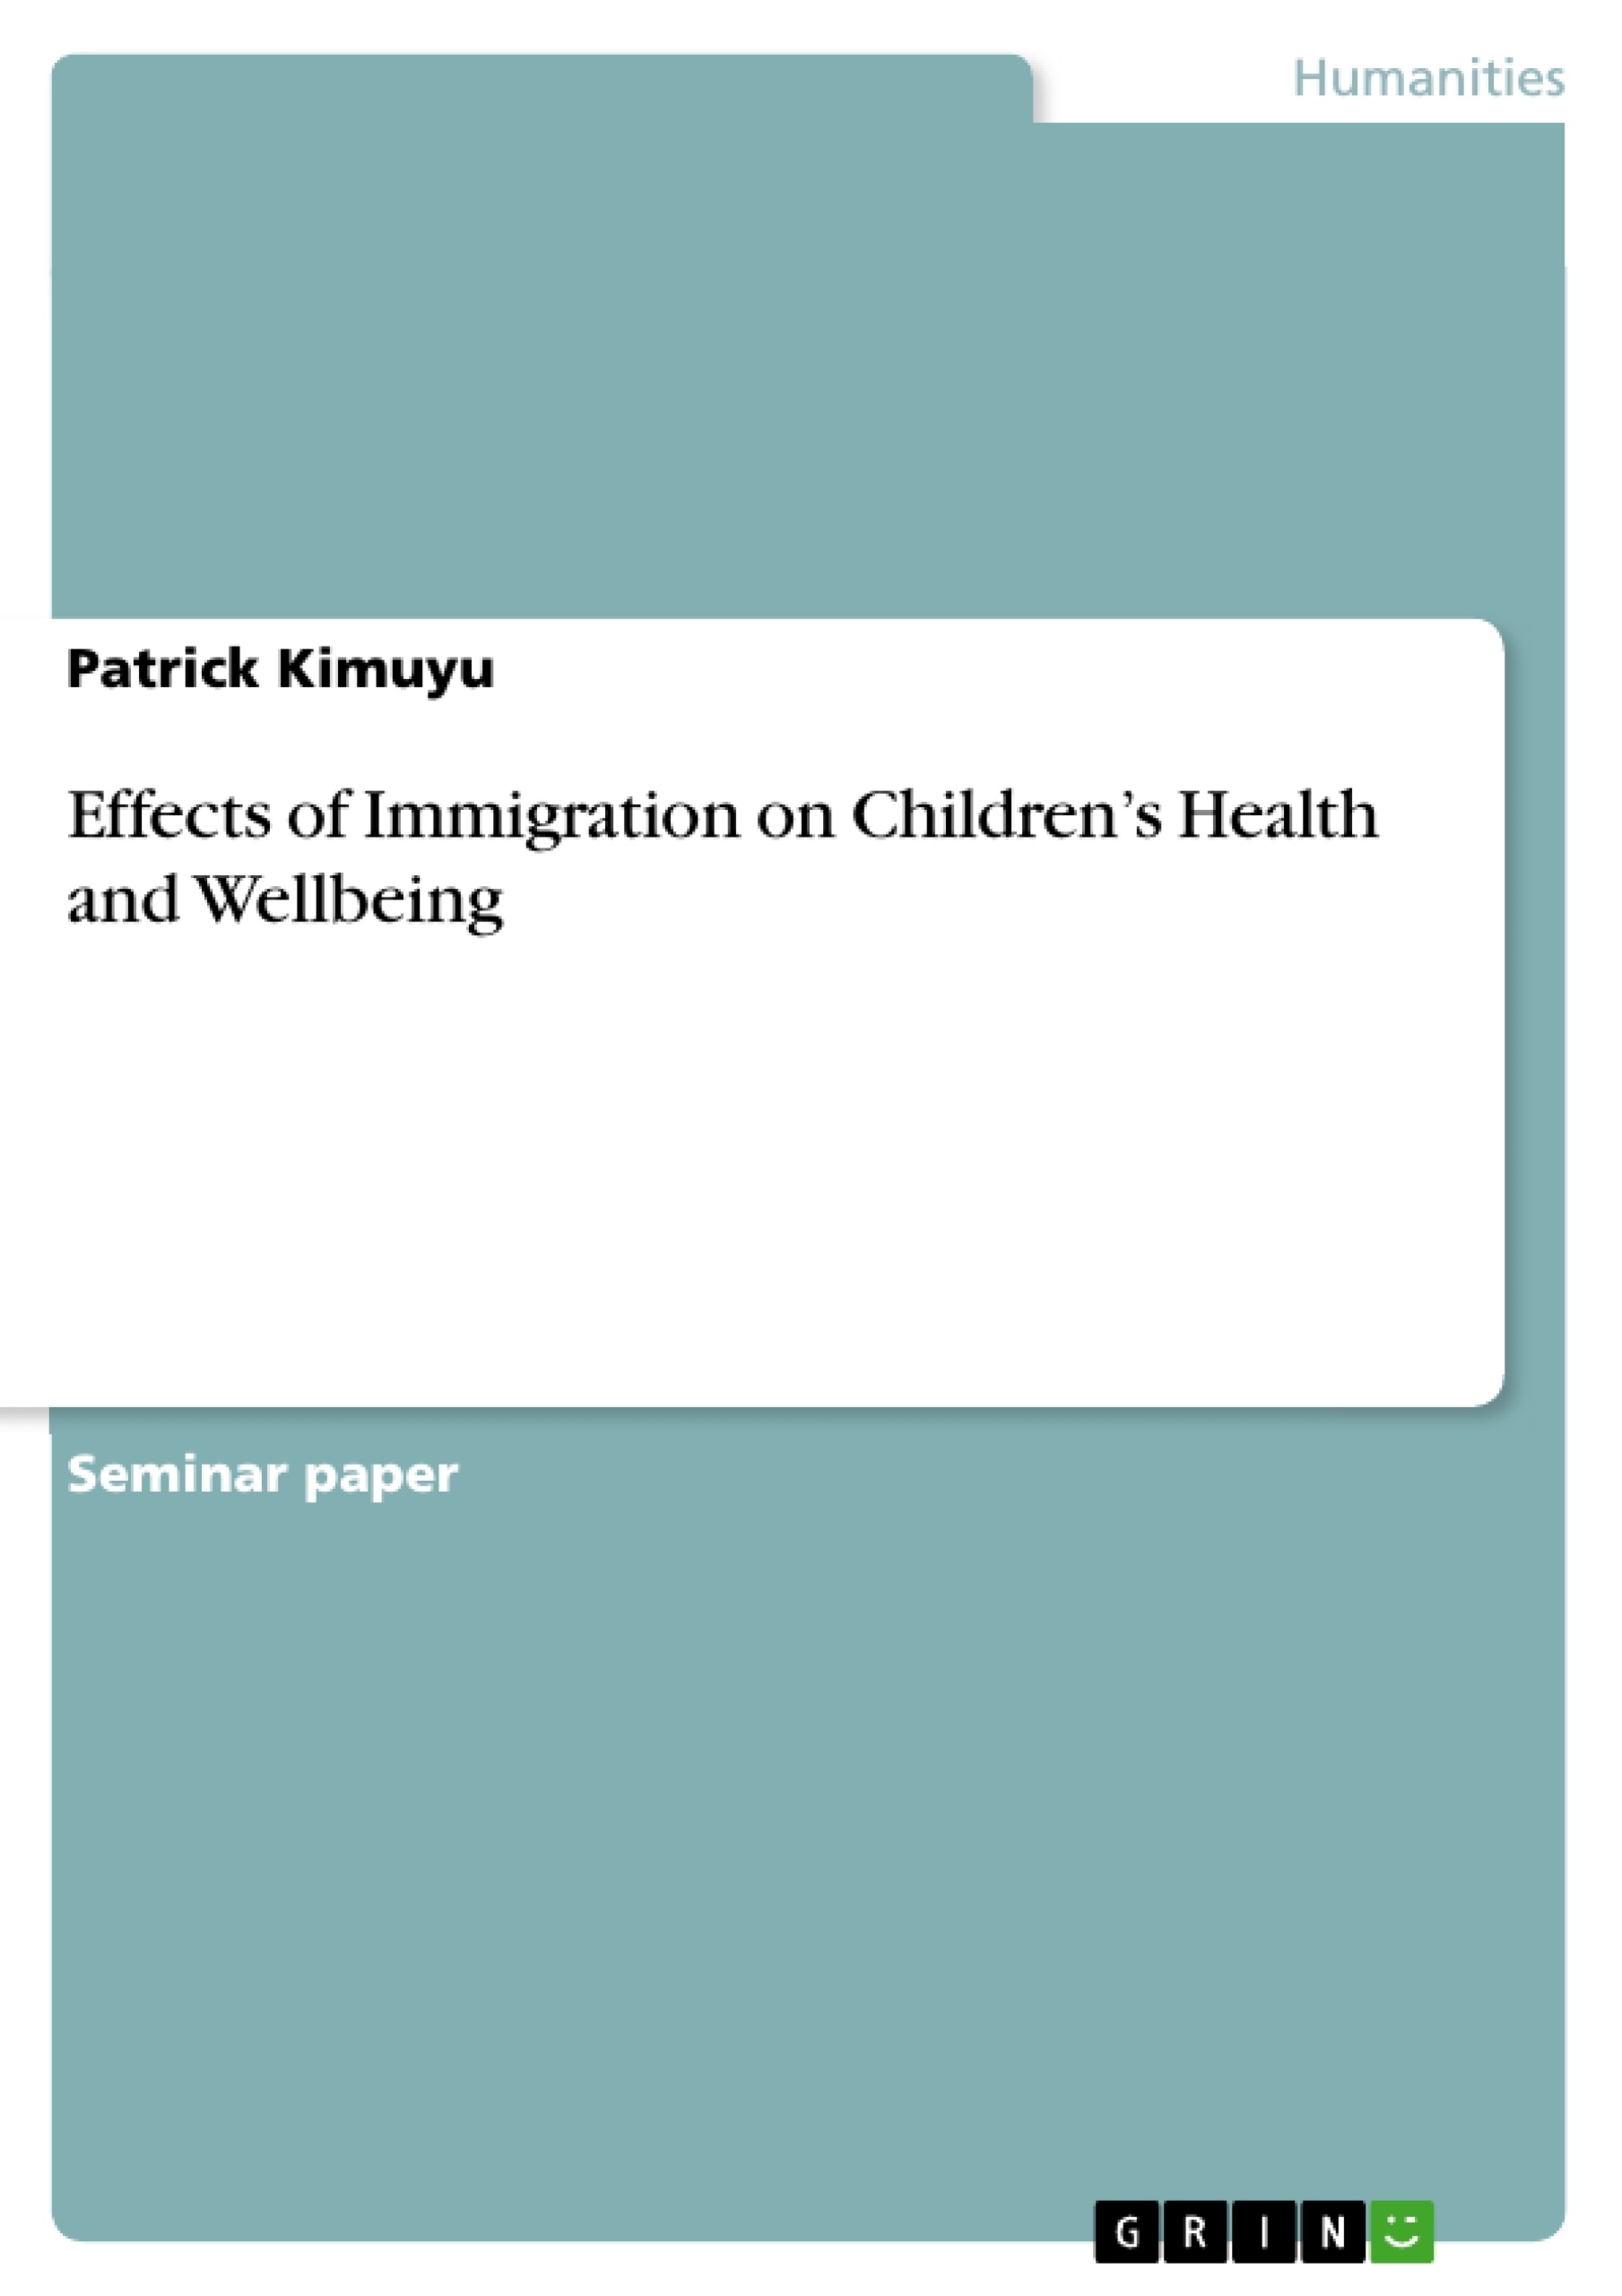 Title: Effects of Immigration on Children’s Health and Wellbeing